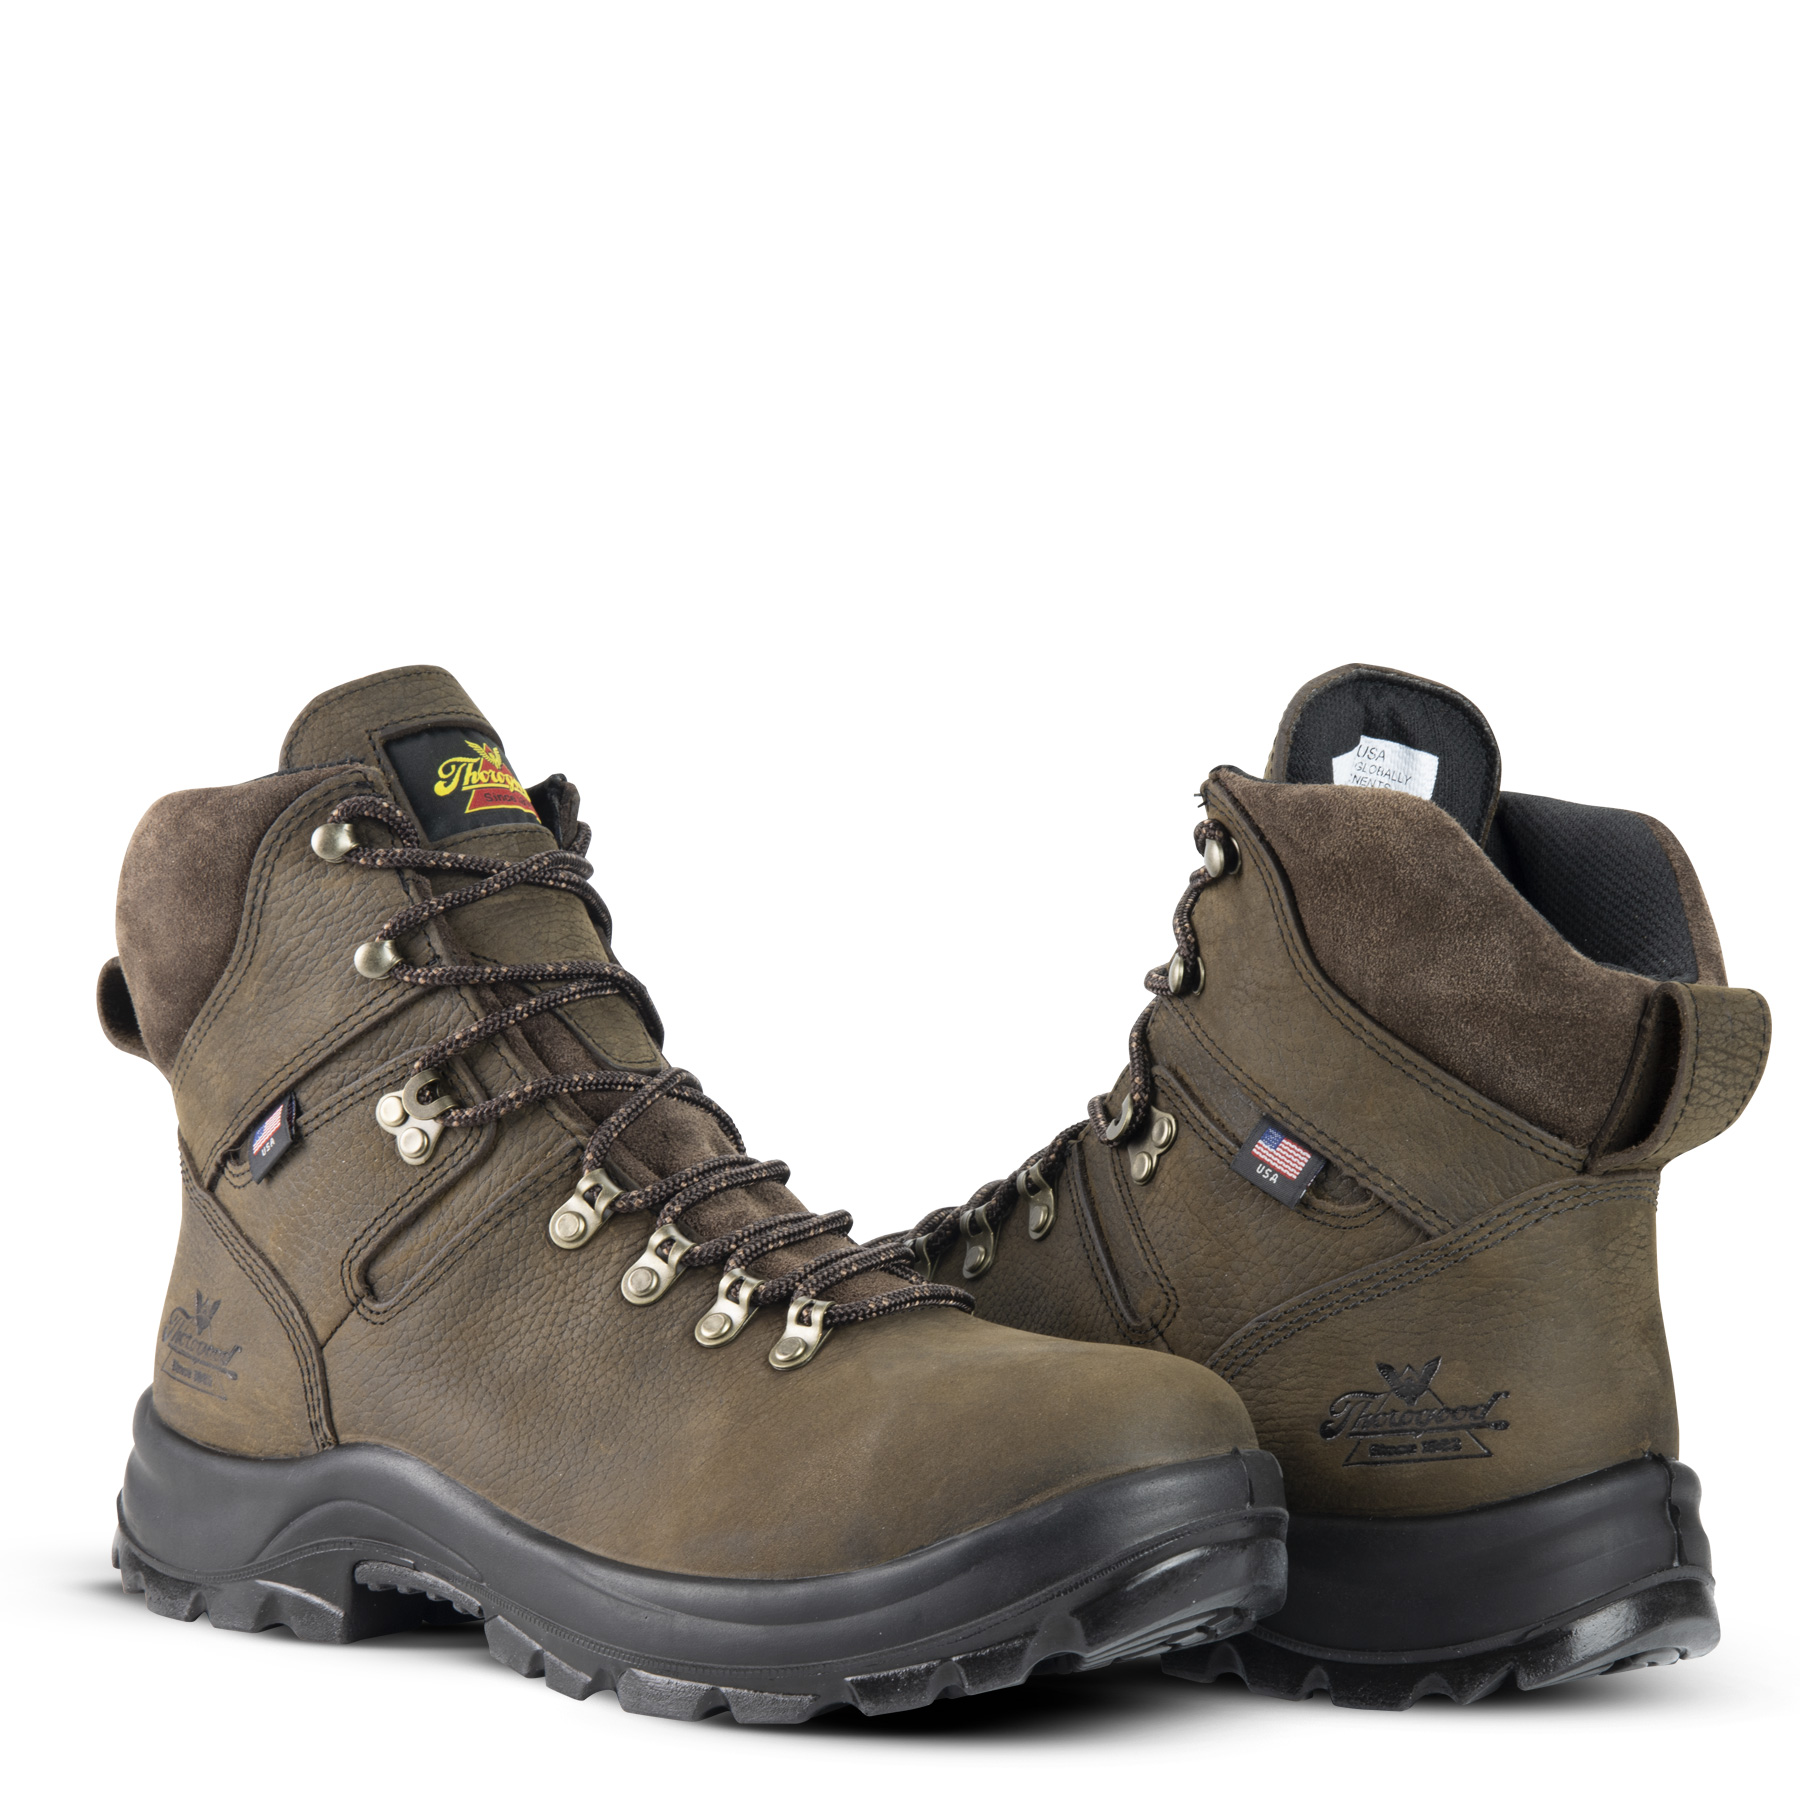 Thorogood American Union Series Waterproof 6 Inch Brown Steel Toe Work Boots from GME Supply